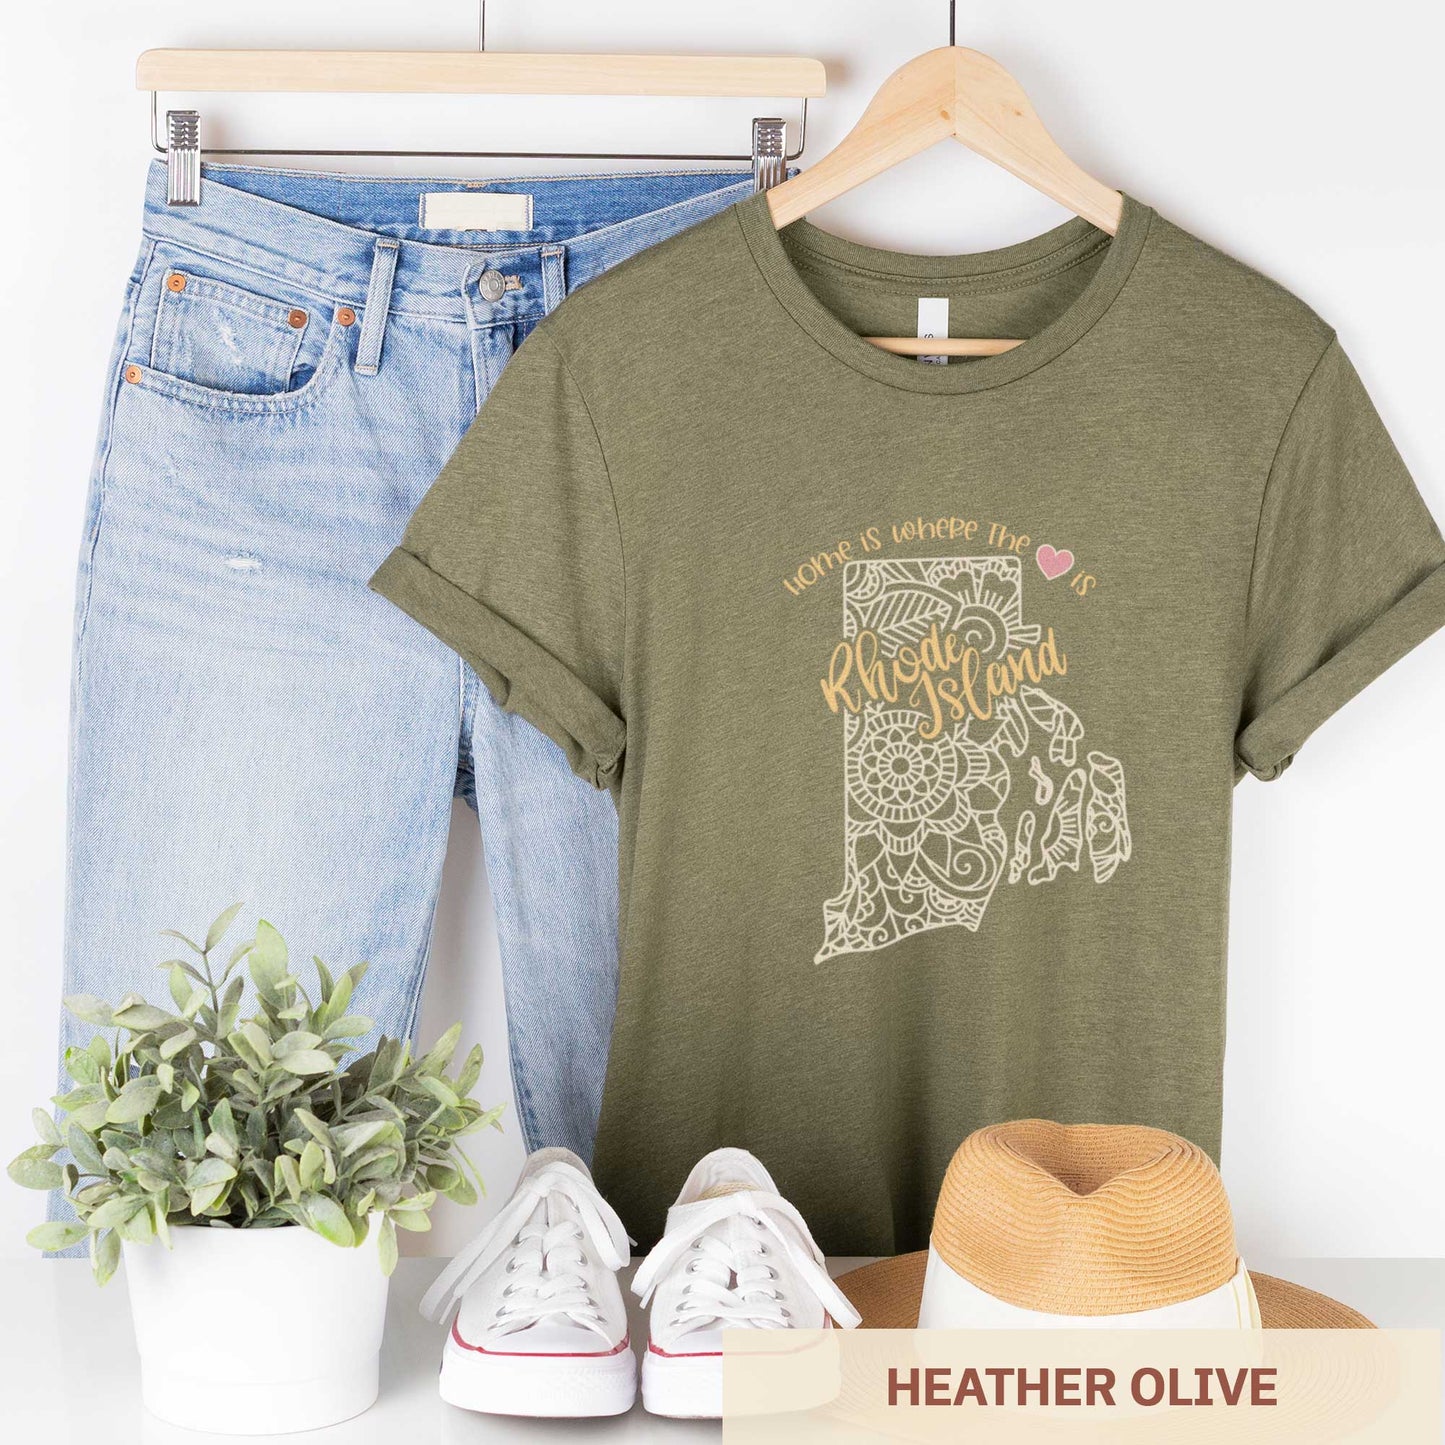 A hanging heather olive Bella Canvas t-shirt featuring a mandala in the shape of Rhode Island with the words home is where the heart is.